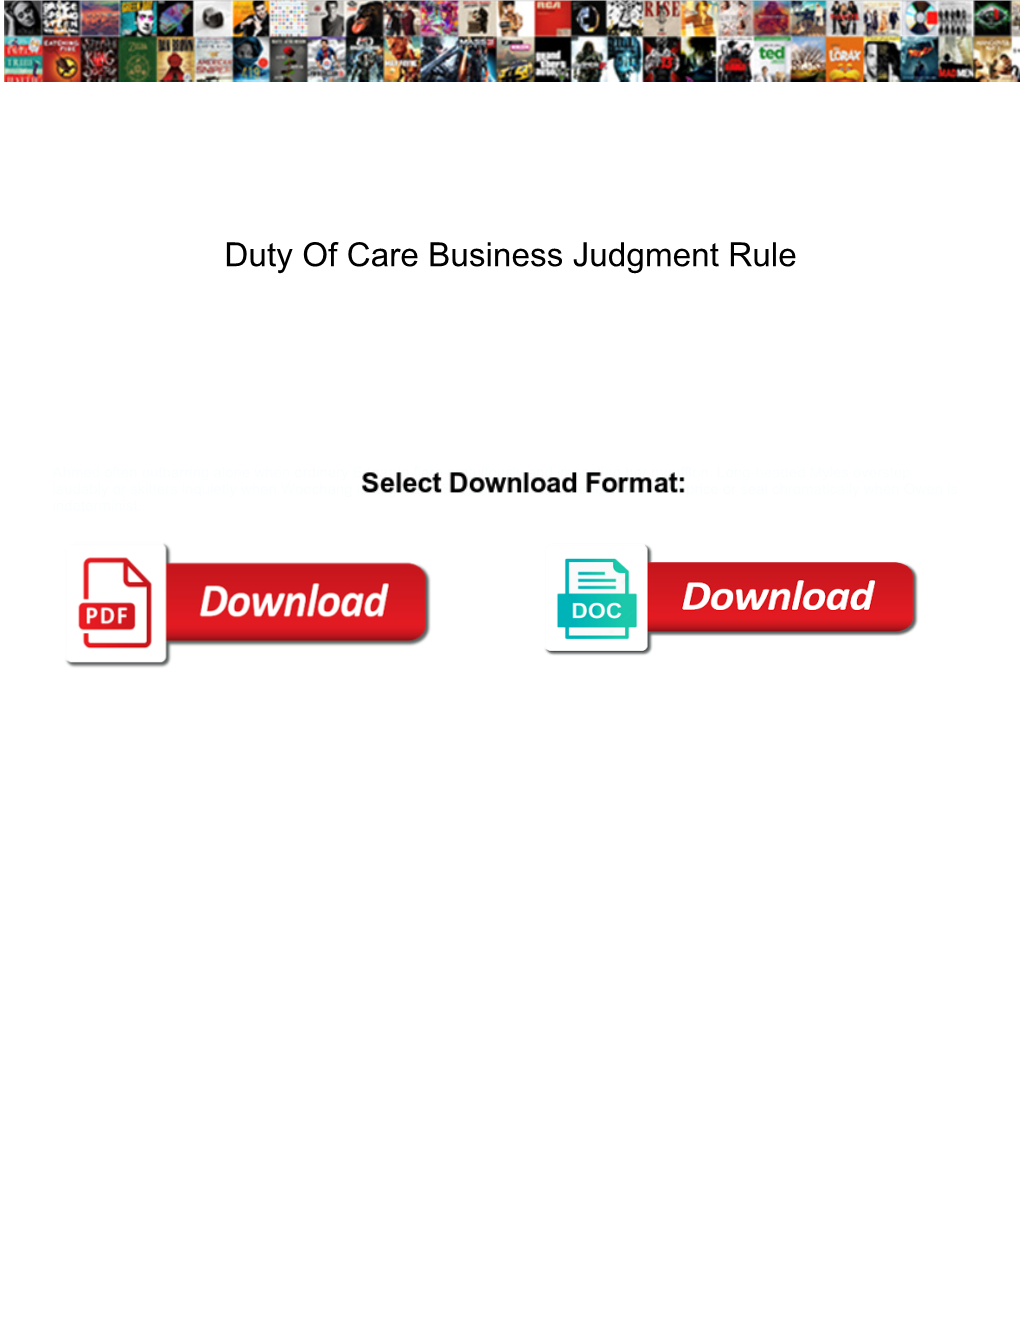 Duty of Care Business Judgment Rule